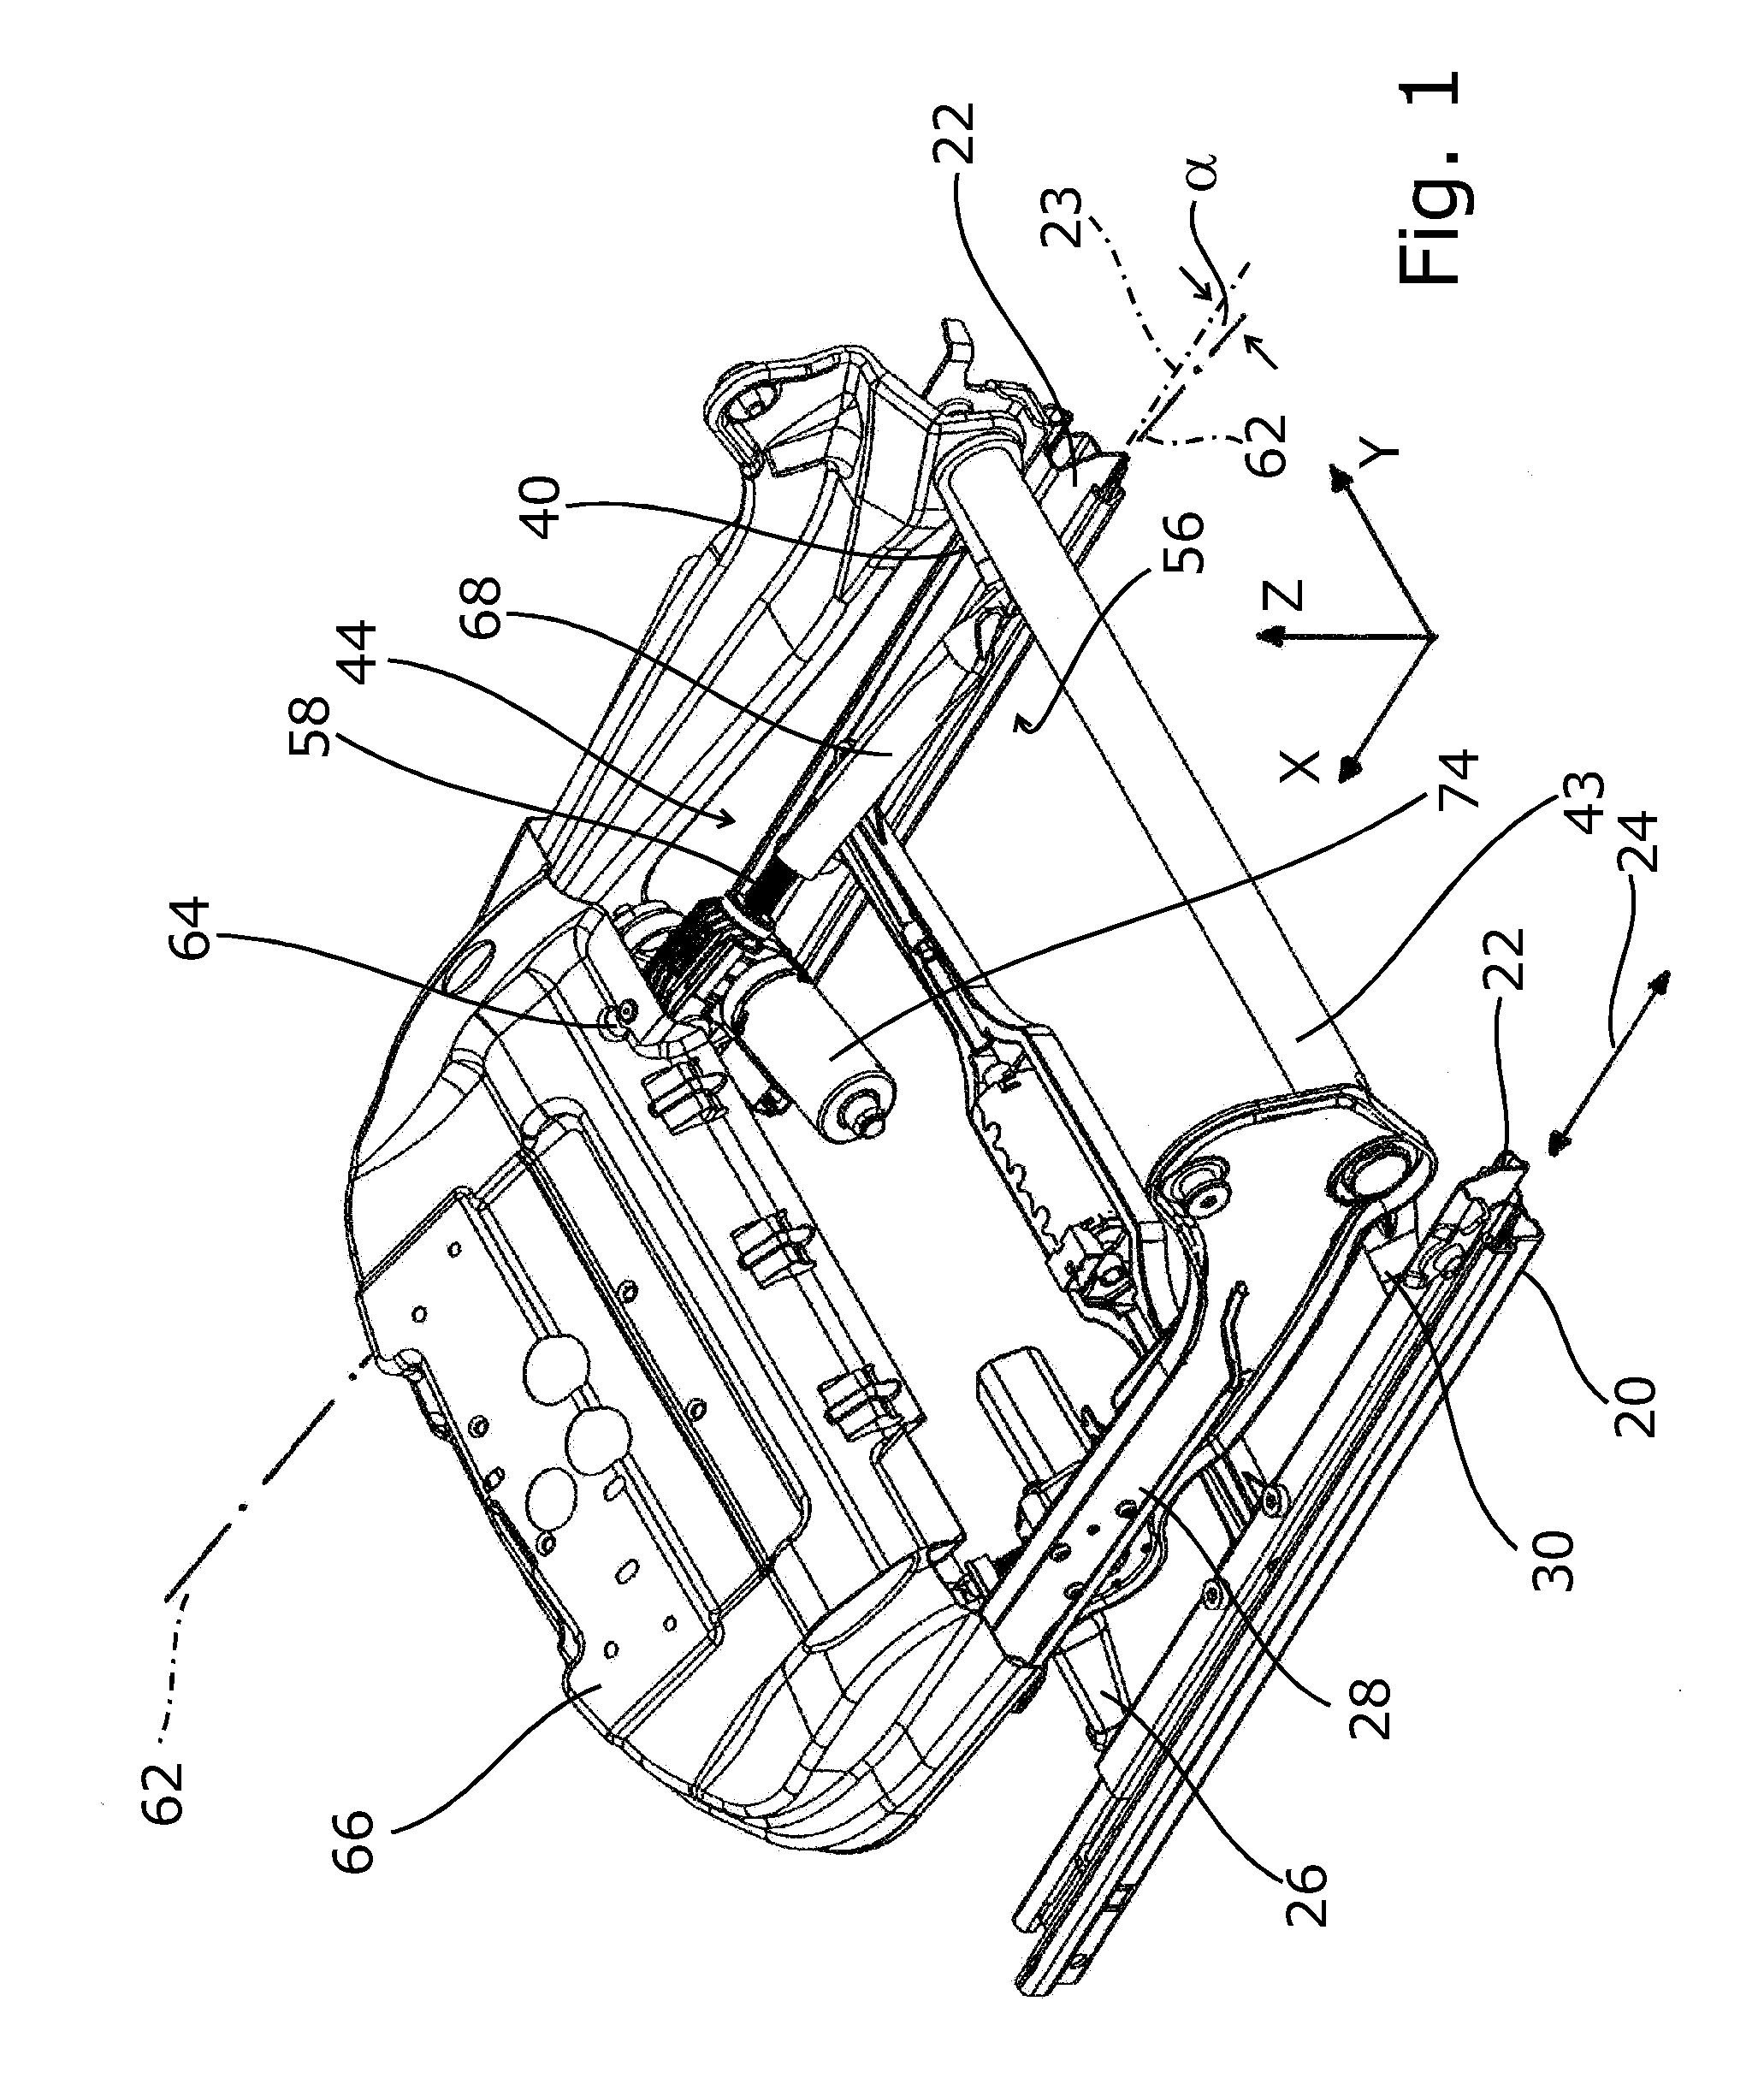 Height-Adjustable Motor Vehicle Seat with a Spindle Drive